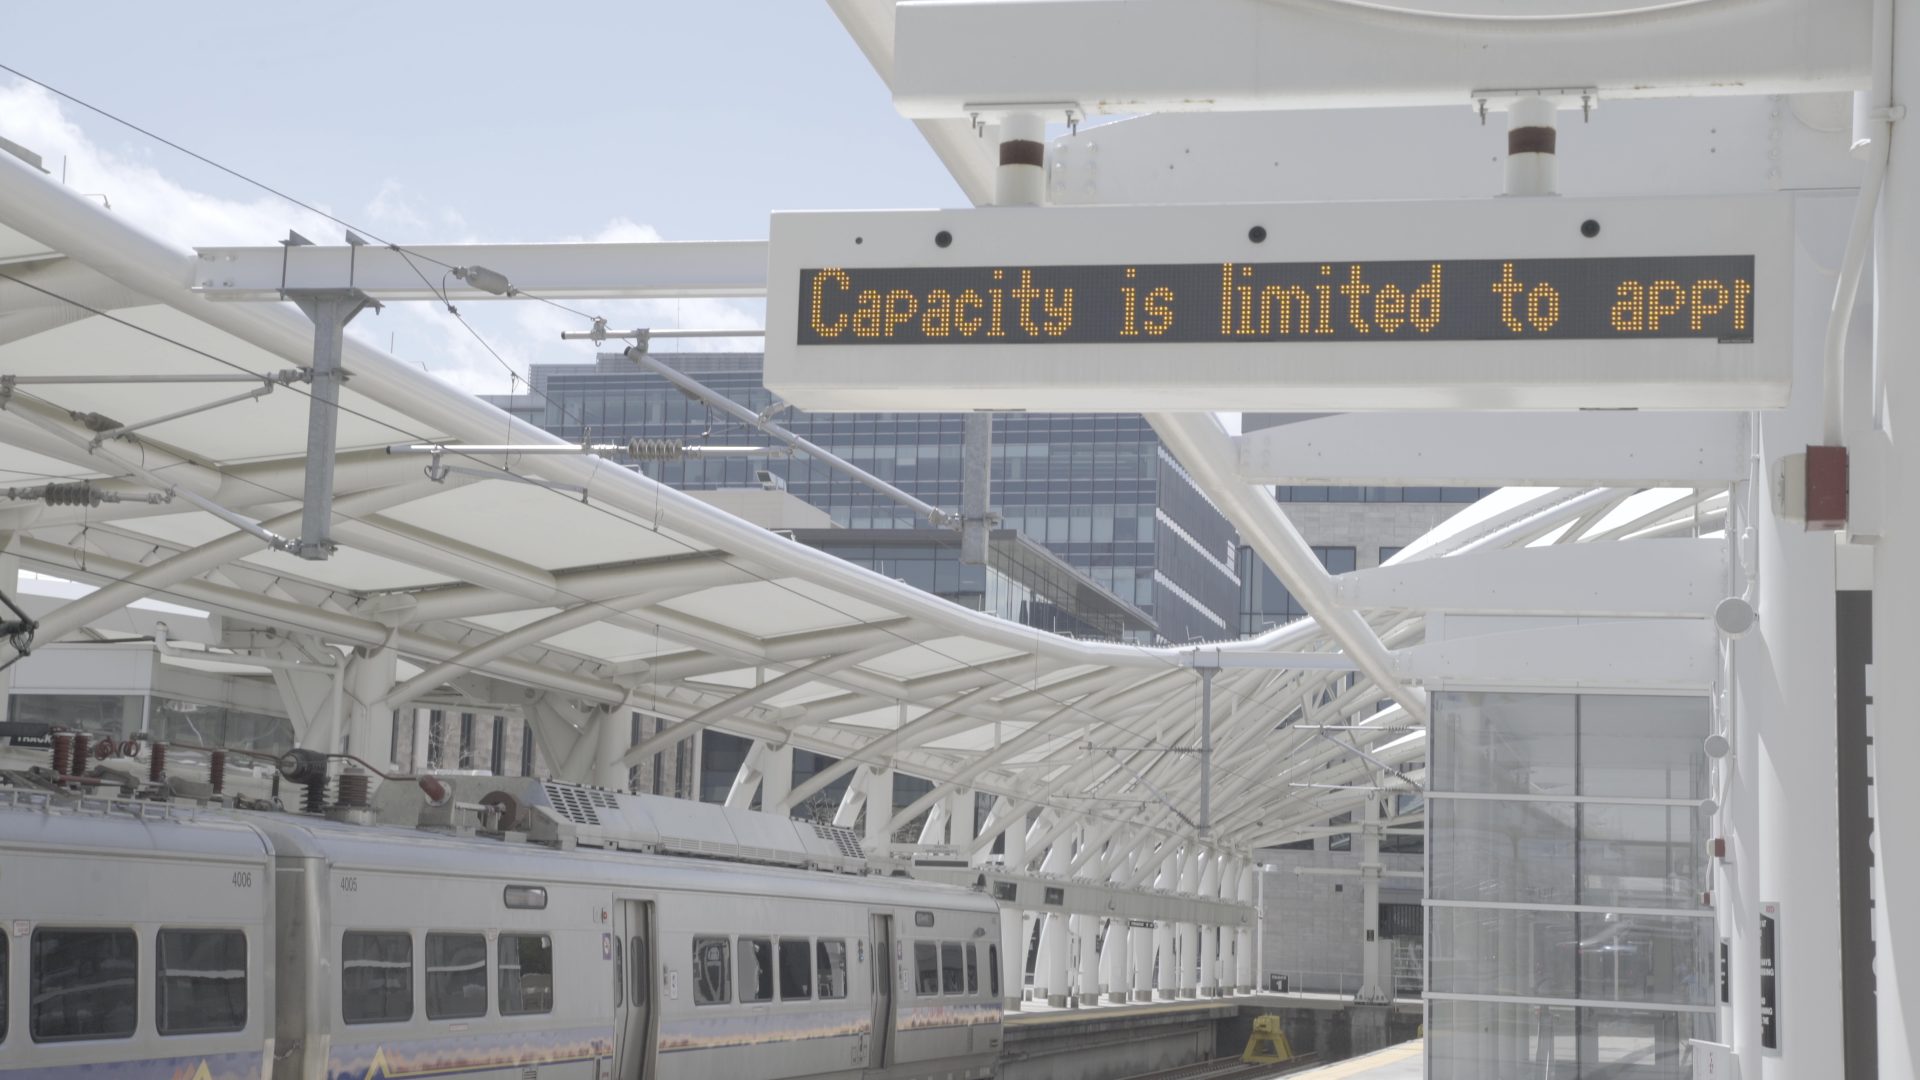 Sony A7rII screen grab of a message at Union Station for awareness of capacity limiting passengers on trains. 